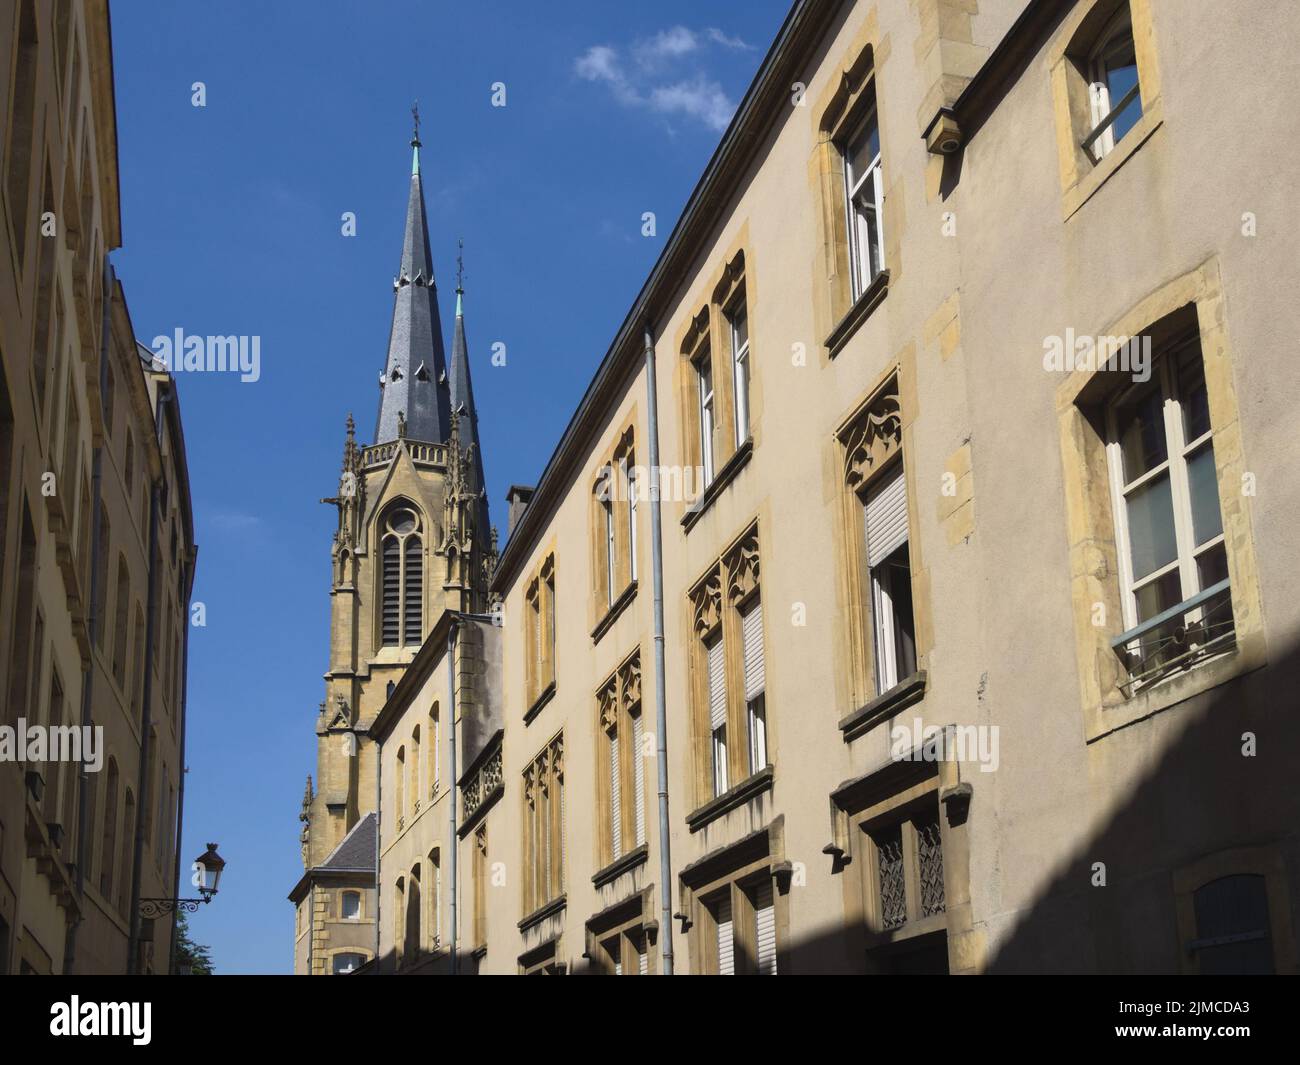 Metz - Old town houses and tower of the church Sainte-SÃ©golÃ¨ne, France Stock Photo